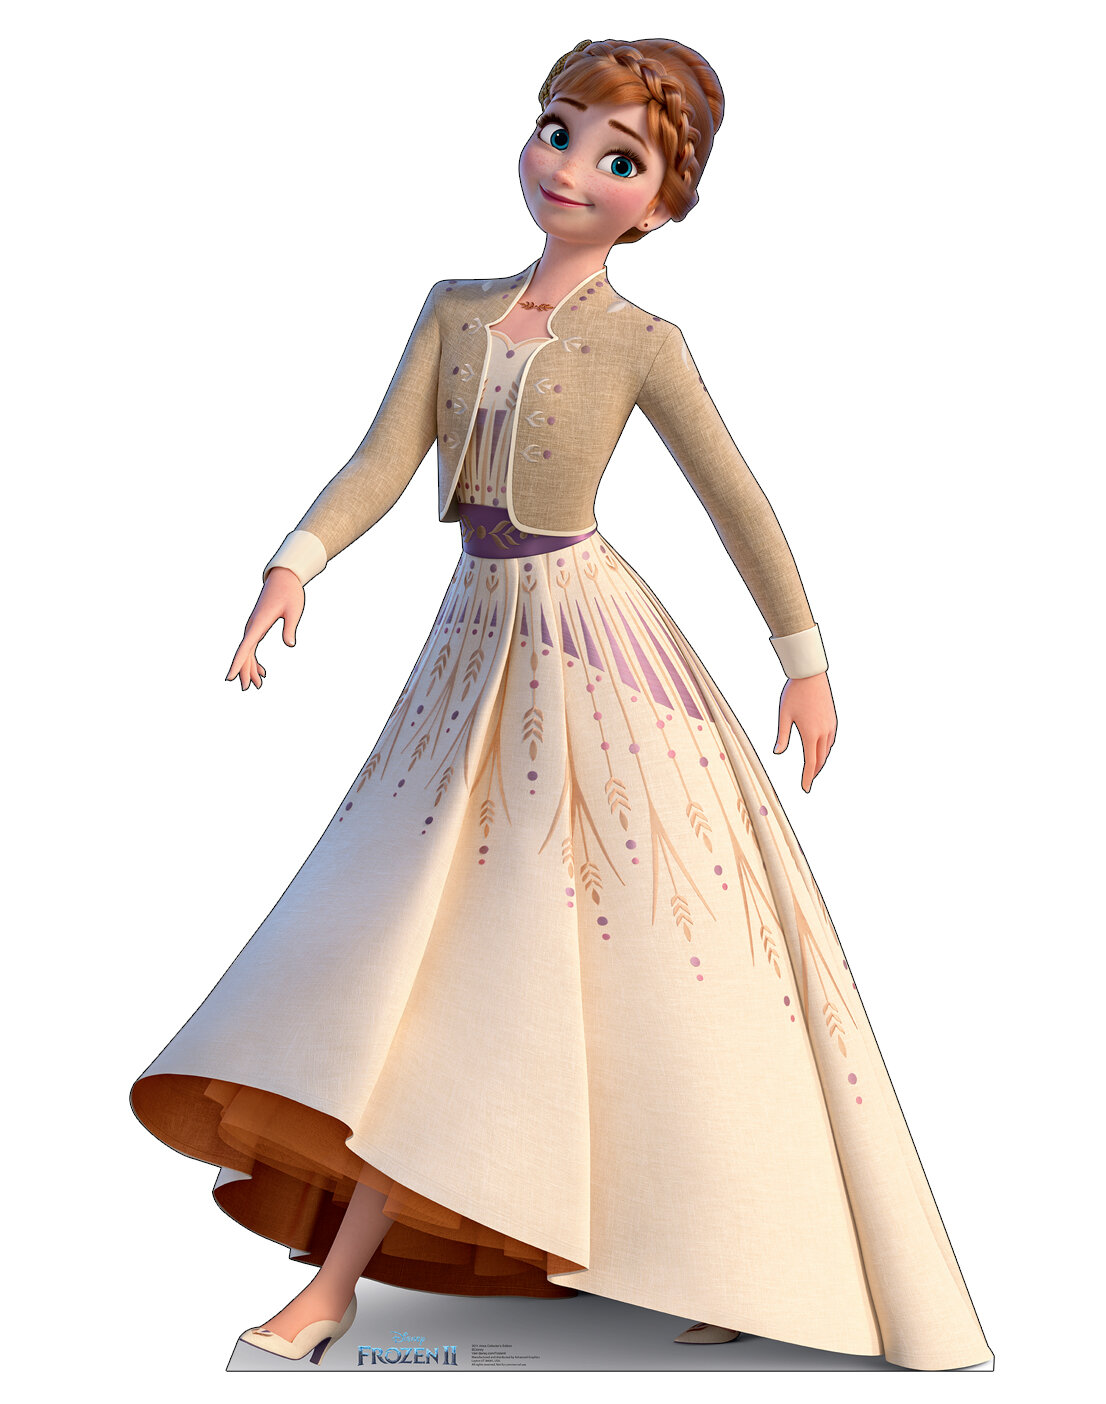 ANNA FROM DISNEY FROZEN FEVER CARDBOARD CUTOUT/STAND UP GREAT FOR FROZEN FANS 